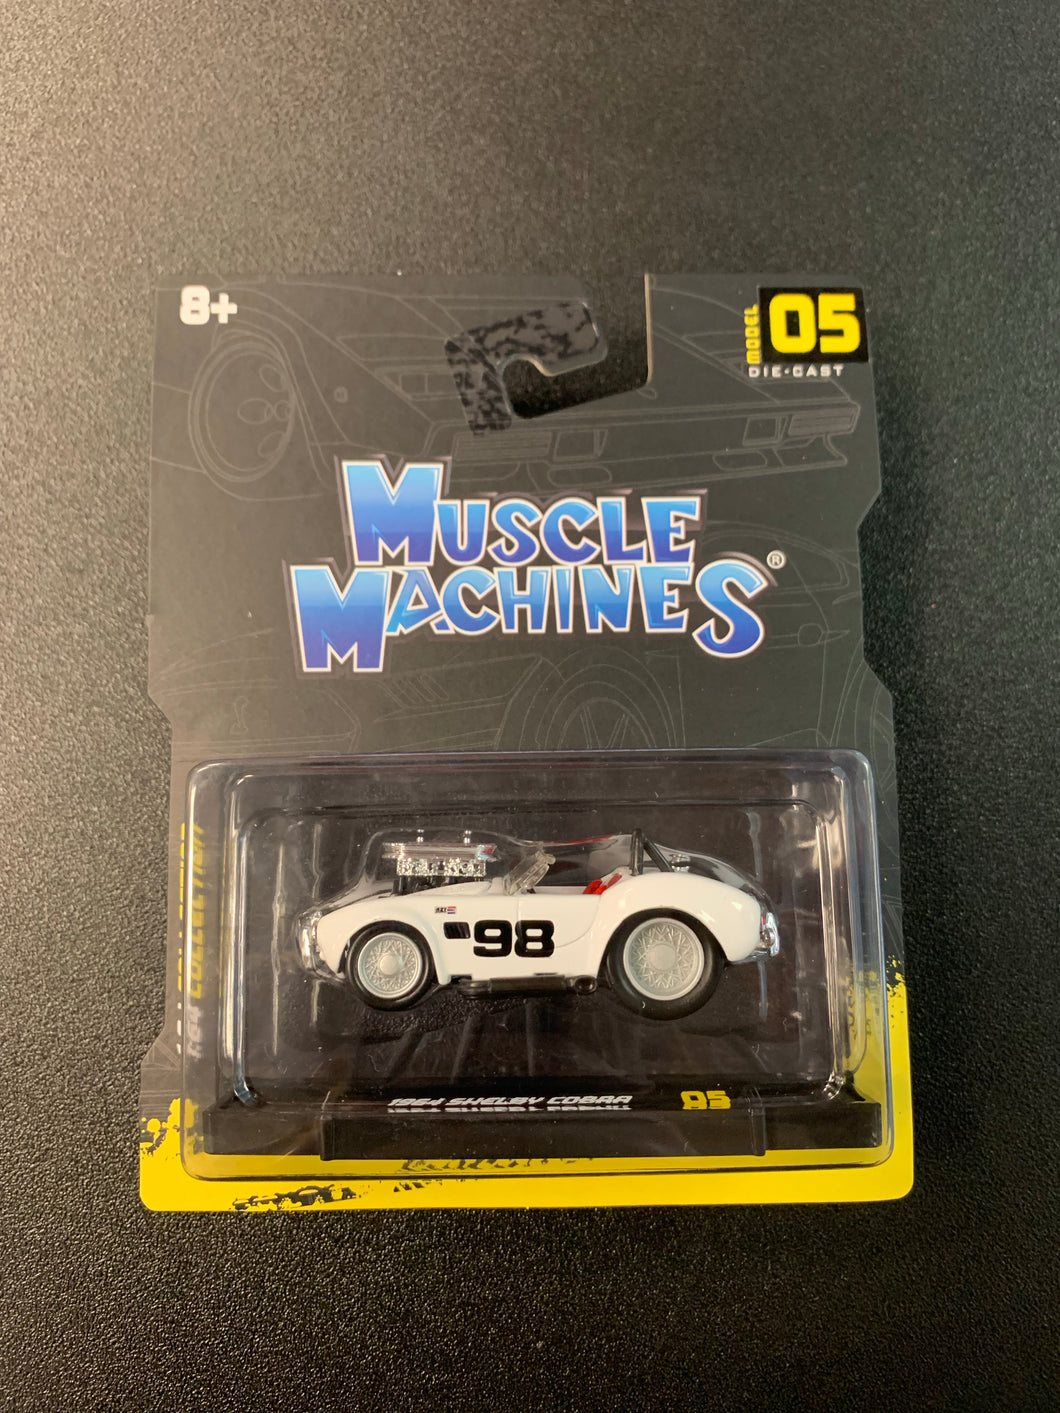 MUSCLE MACHINES MODEL 05 SERIES 1 1:64 COLLECTION 1964 SHELBY COBRA